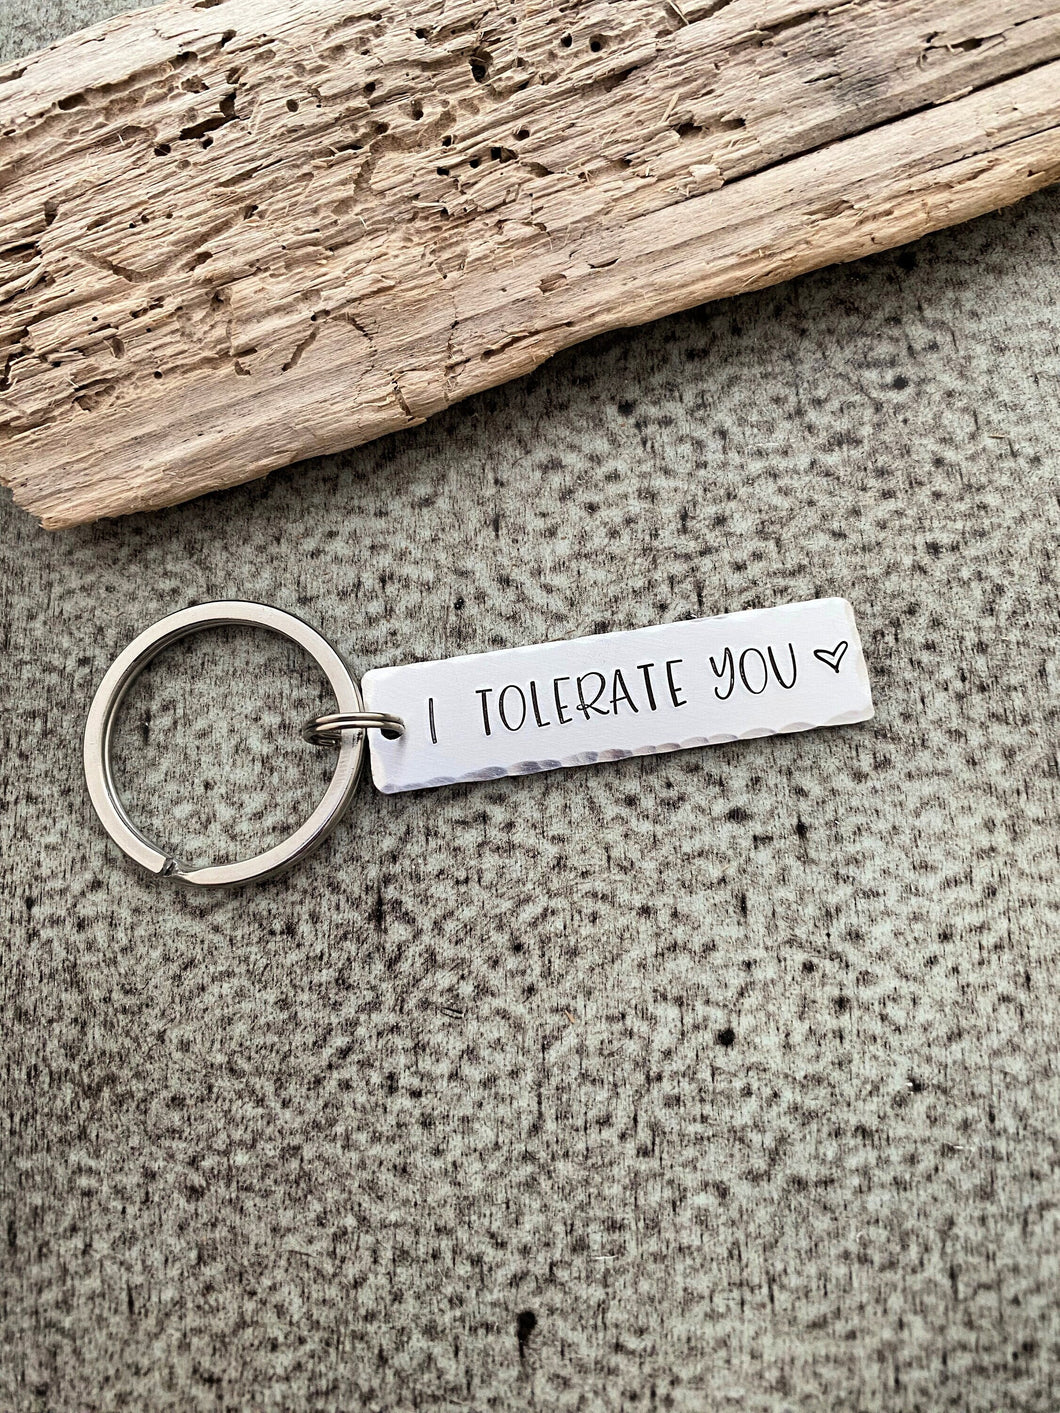 I tolerate you keychain - aluminum silver Keychain - Valentine's Day Gift Idea for him - Funny Key chain - Gift for boyfriend - Rectangle